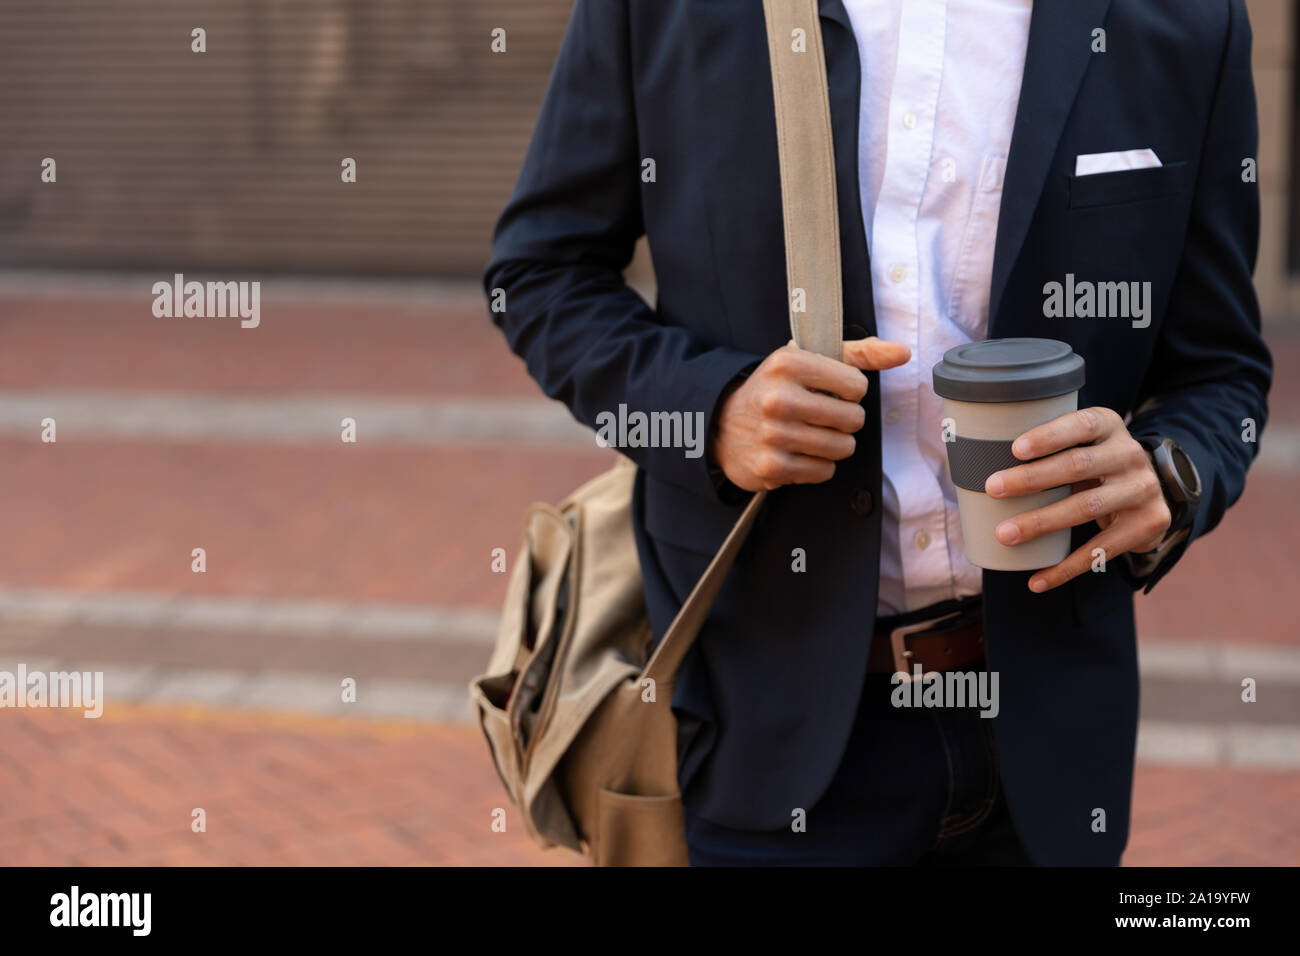 Young professional man on the go Stock Photo